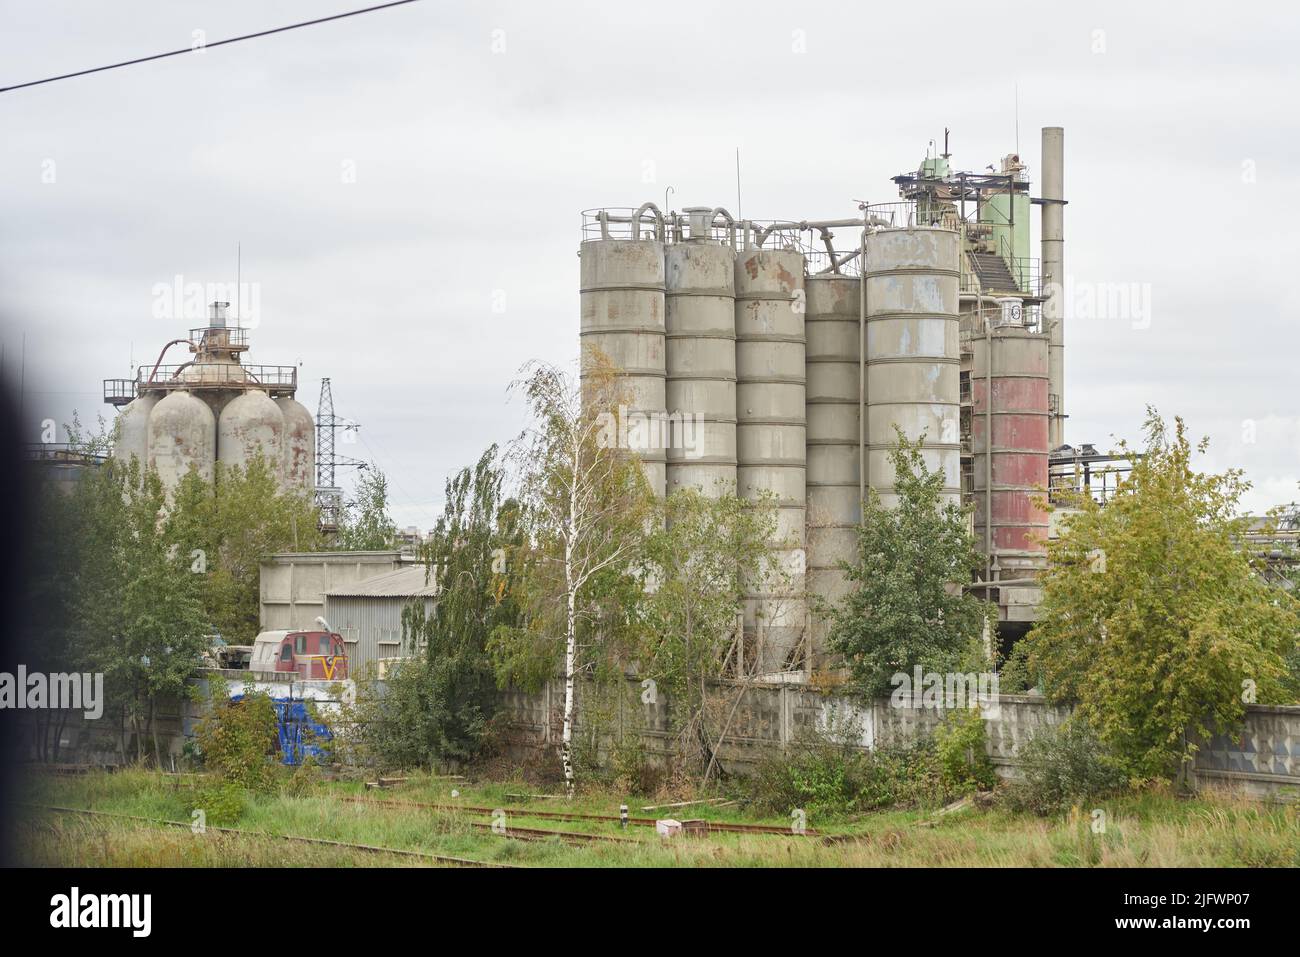 Cement bunkers (silos) in autumn day among the trees Stock Photo